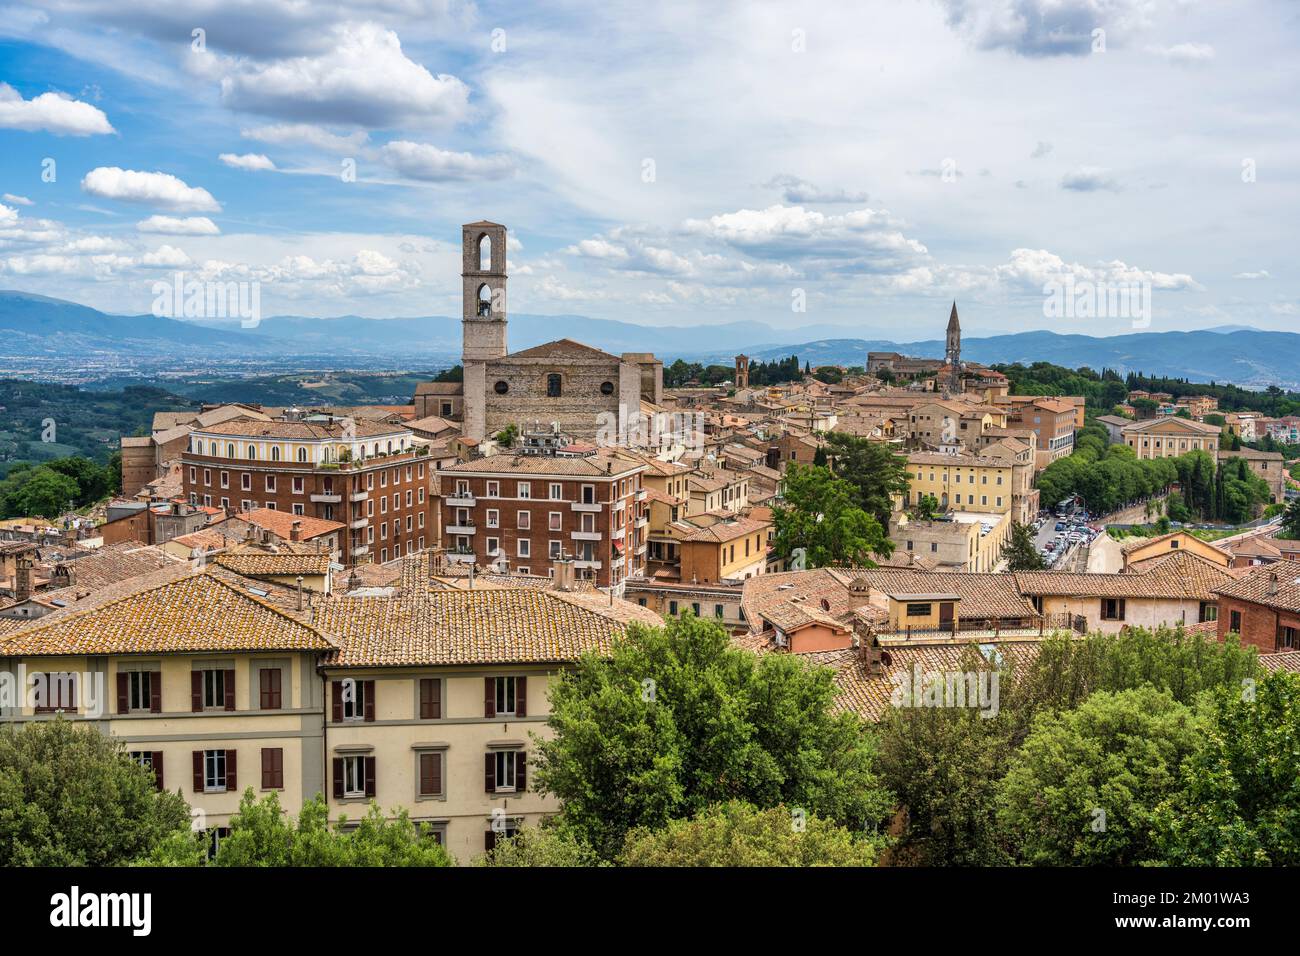 View looking south-east from the Carducci Gardens, with the Basilica di San Domenico dominating the skyline, in Perugia, Umbria, Italy Stock Photo